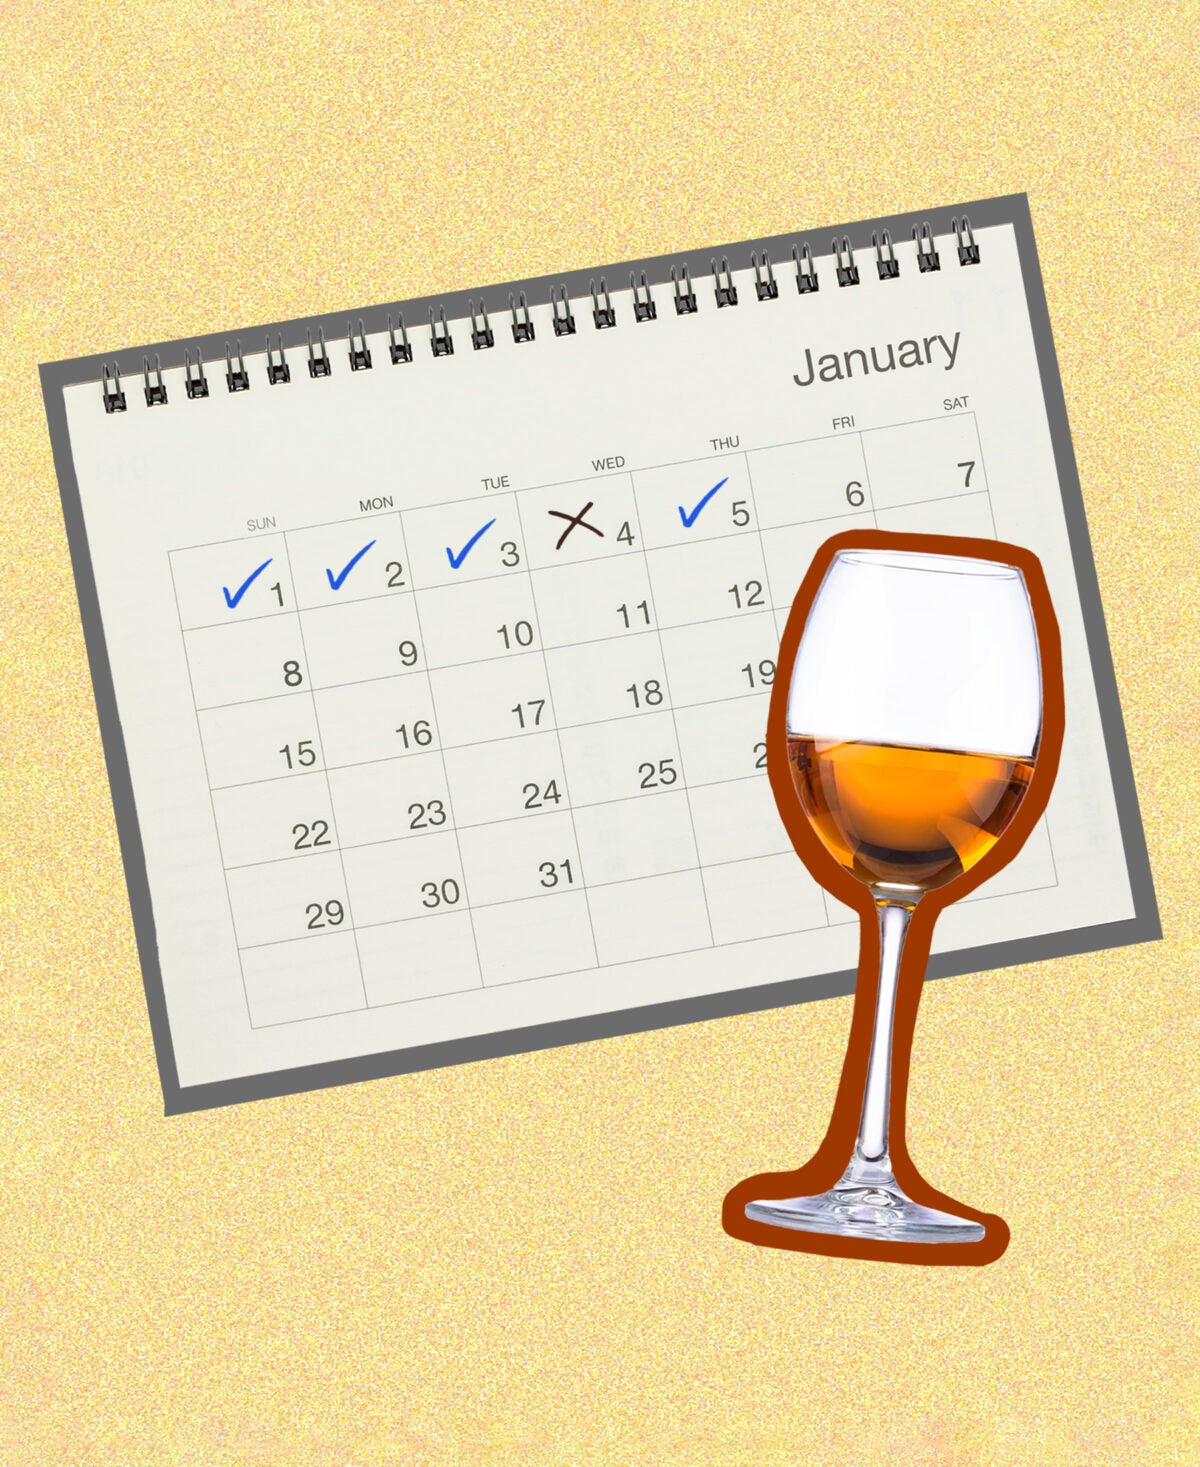 Photo illustration: A January calendar is marked with four check marks and one x for the first week of the month. In the foreground is a wine glass with orange liquid. The composition is on a yellow-speckled background.